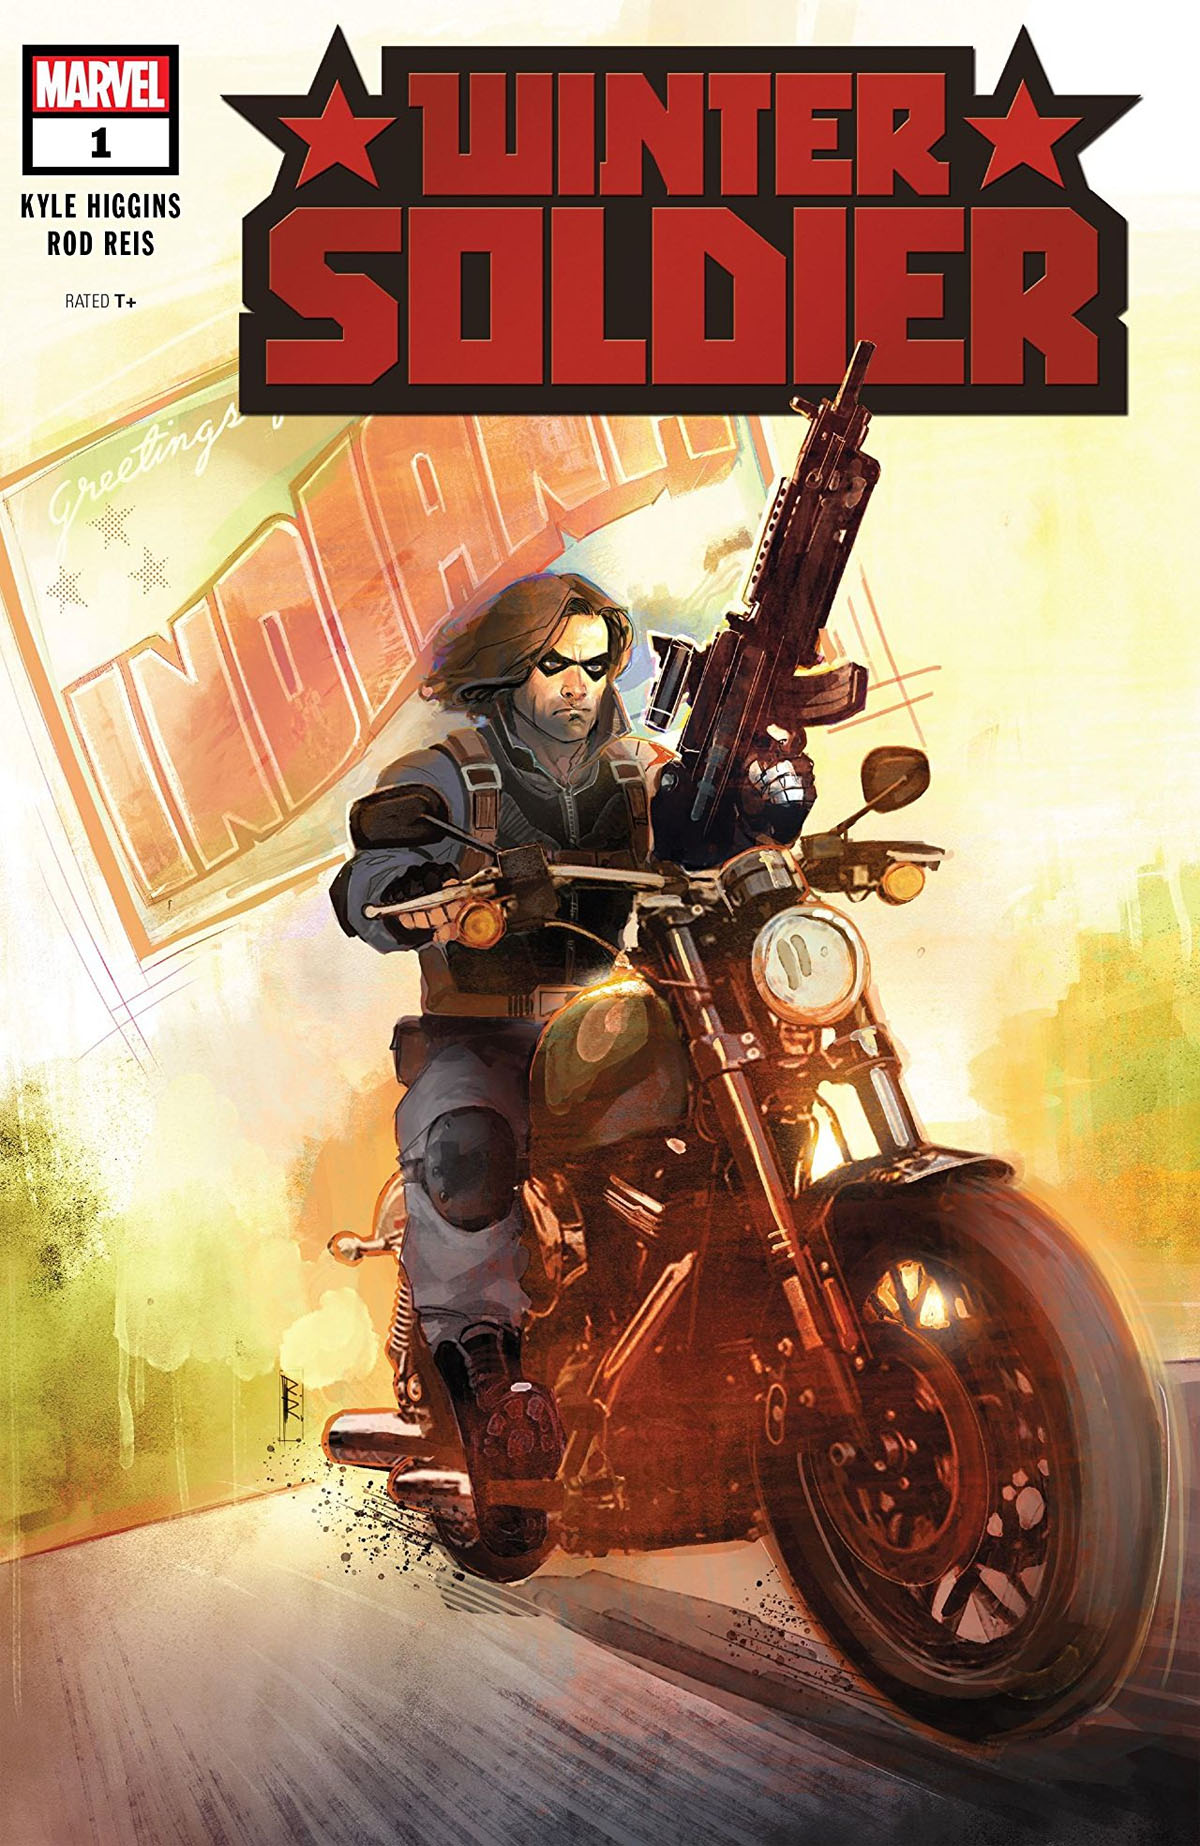 Winter Solider #1 review: Bucking the trend